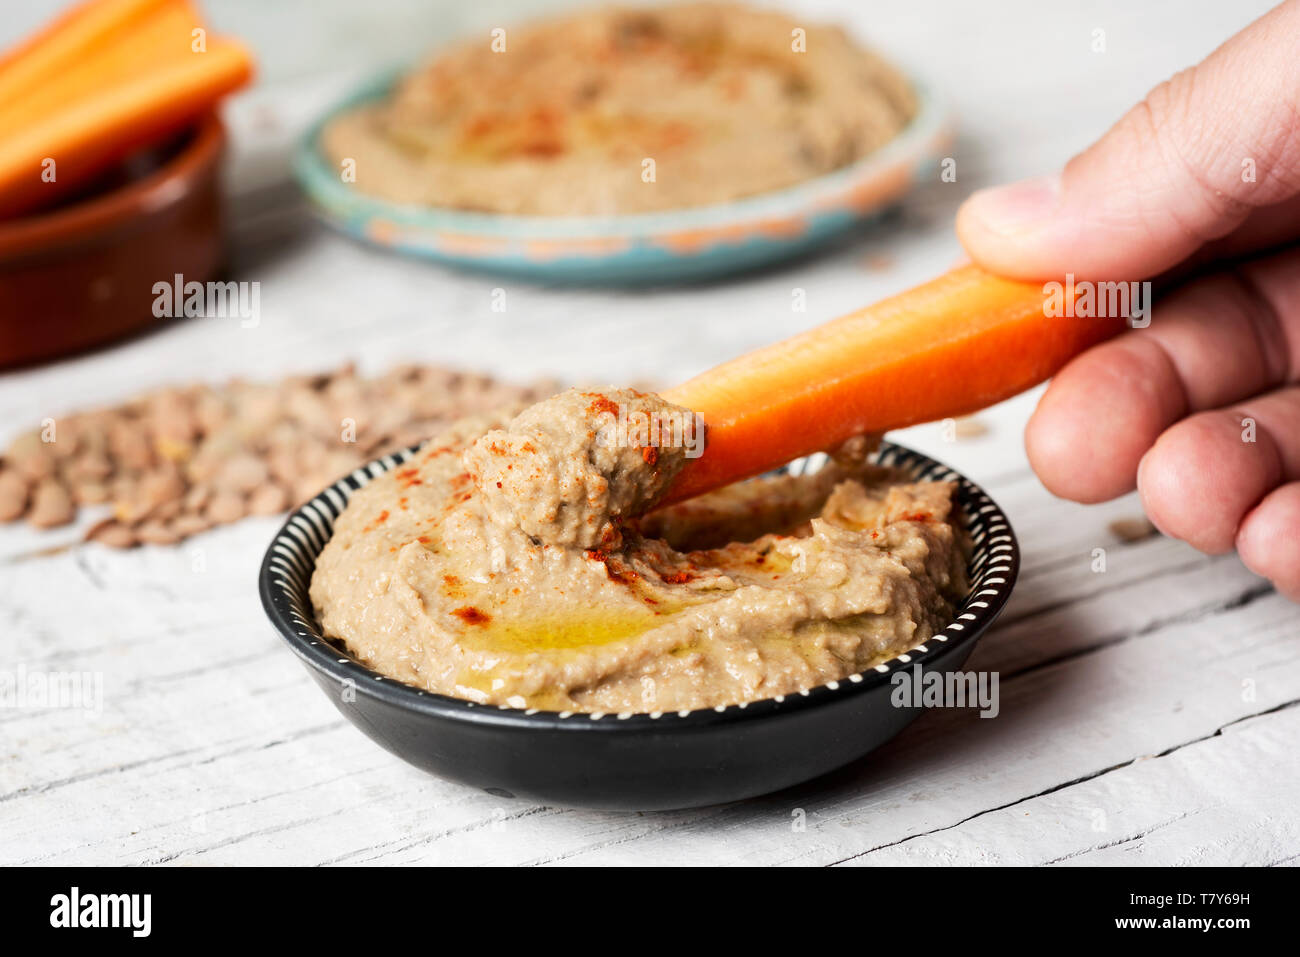 closeup of a man dipping a strip of carrot in a homemade lentil hummus seasoned with paprika served in a black and white plate, on a white rustic wood Stock Photo